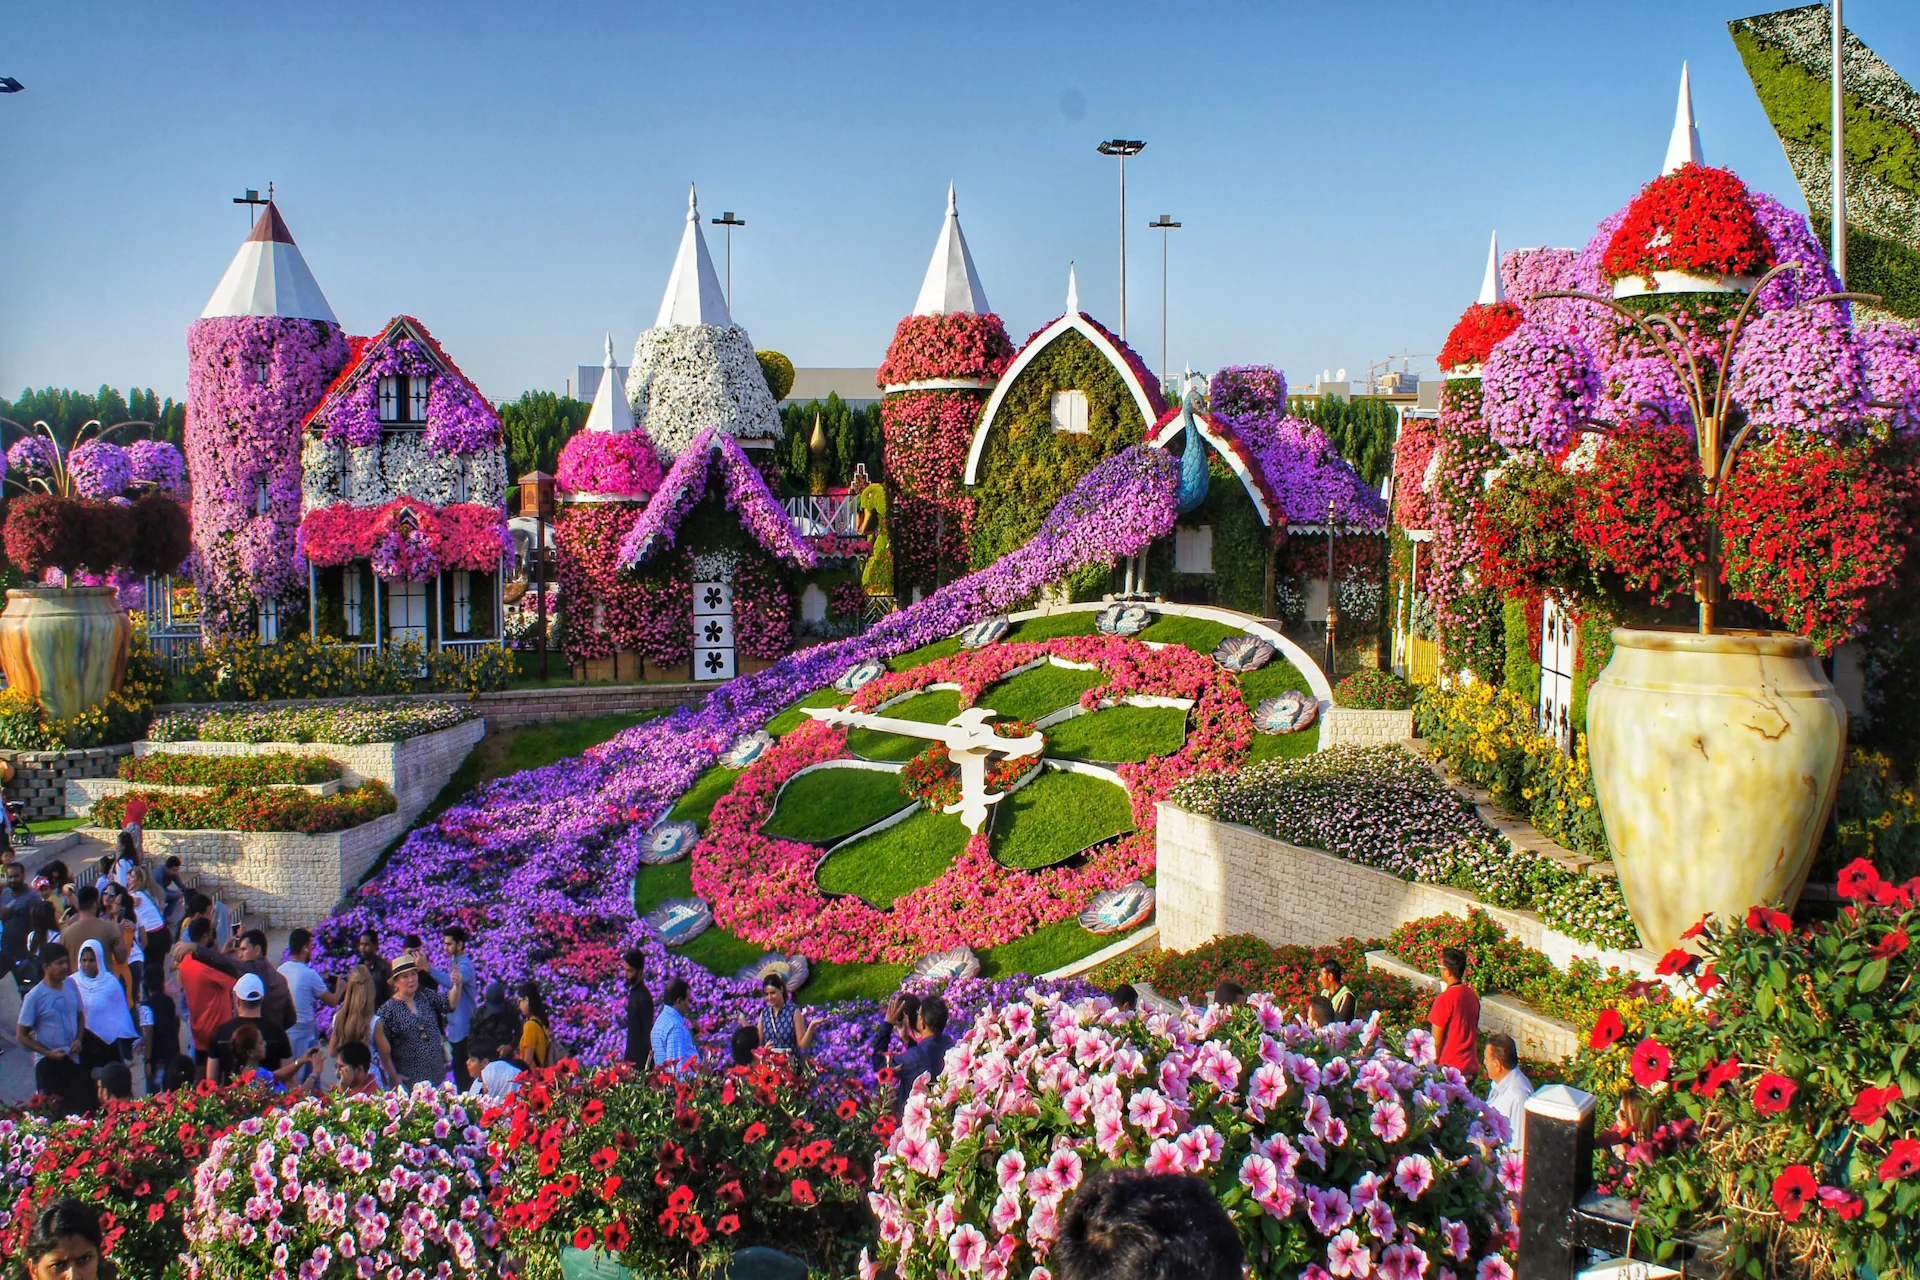 Things to do in Dubai under AED 50 - Dubai Miracle Garden